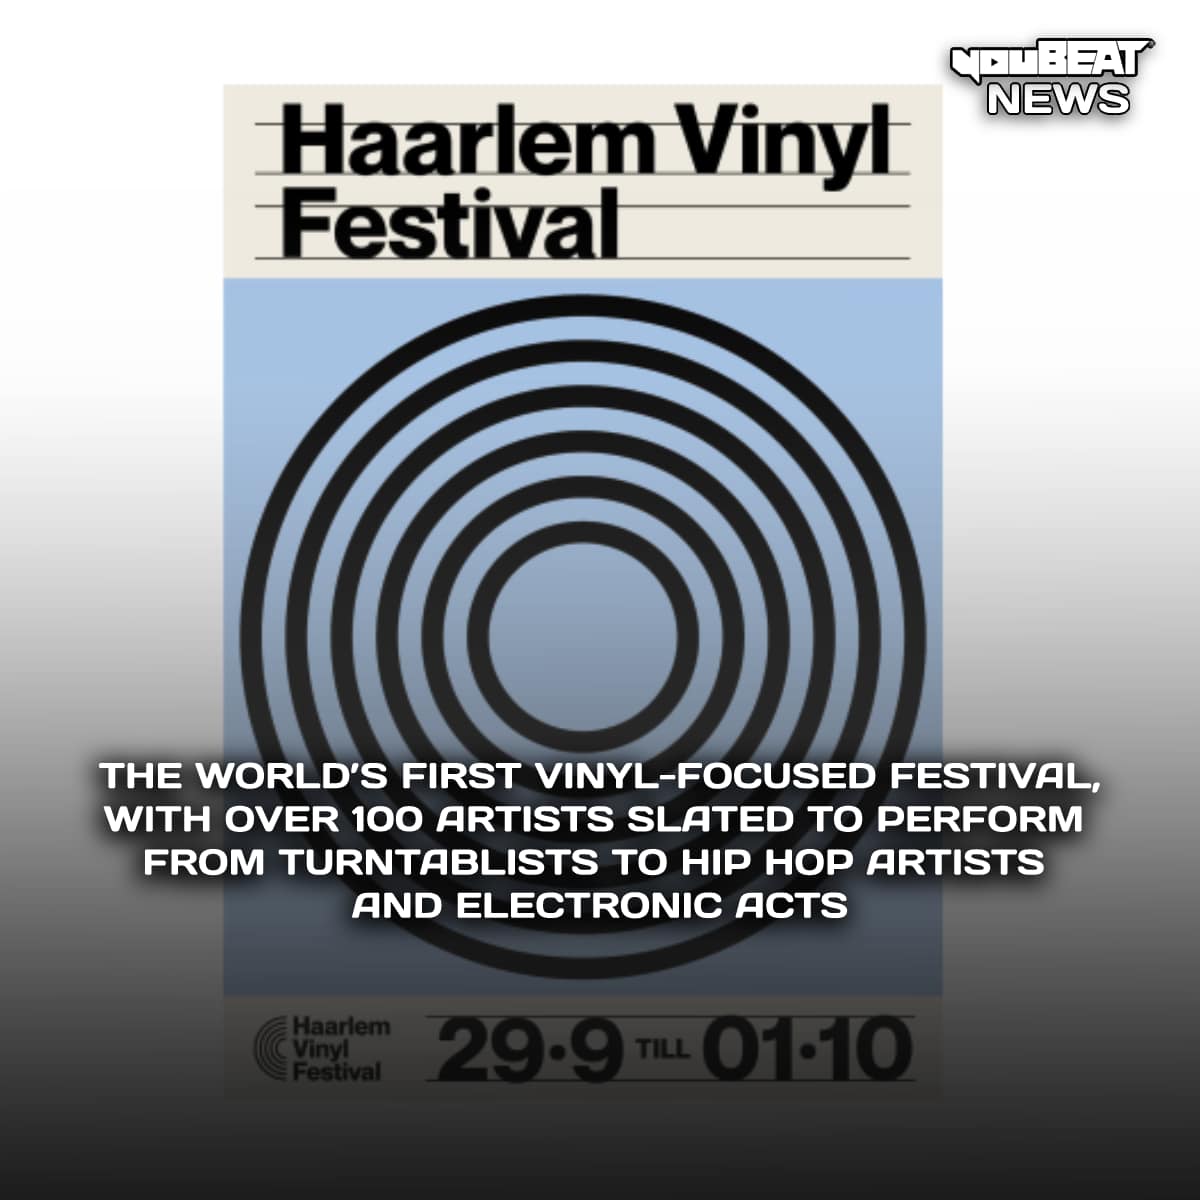 From September 29th 2023 to October 1st 2023 #Haarlem will see the birth of the first vinyl festival. #HaarlemVinylFestival will also take on dozens of arts, culture, and live events across the city with over 100 artists ready to perform 💿🇳🇱🎧

➡️ haarlemvinylfestival.com